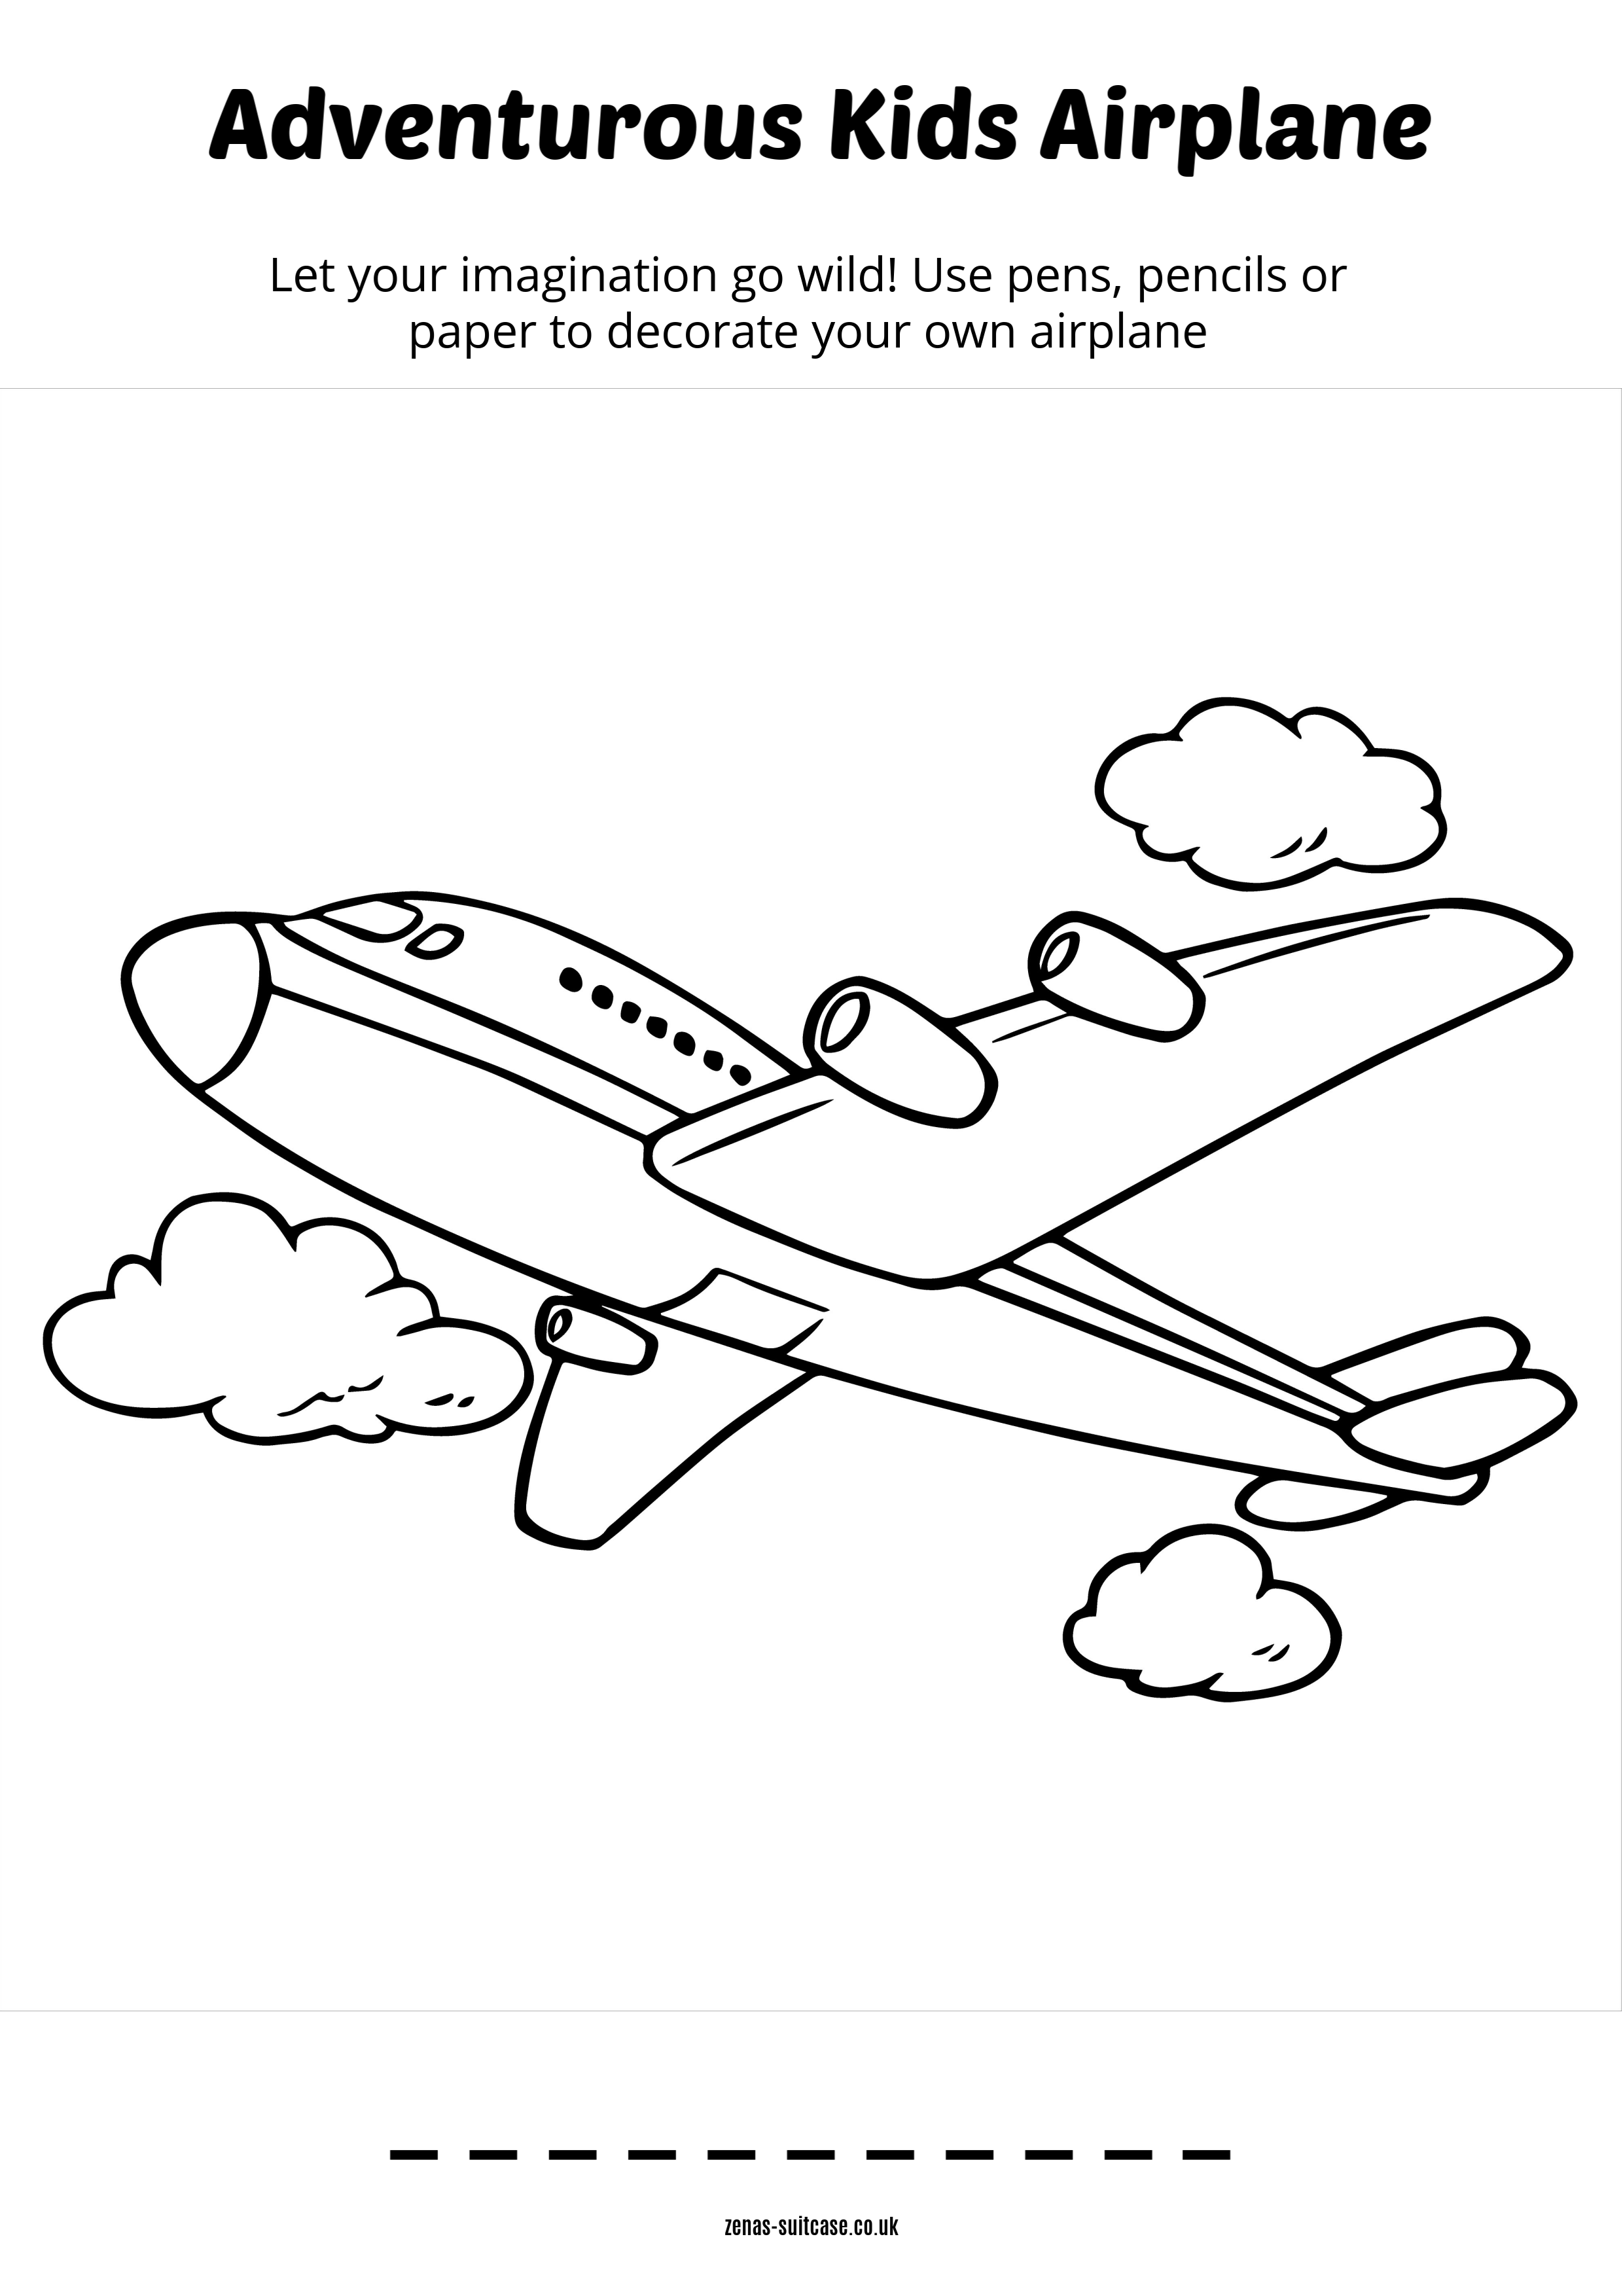 Activity Sheets For Kids   Travel Themed